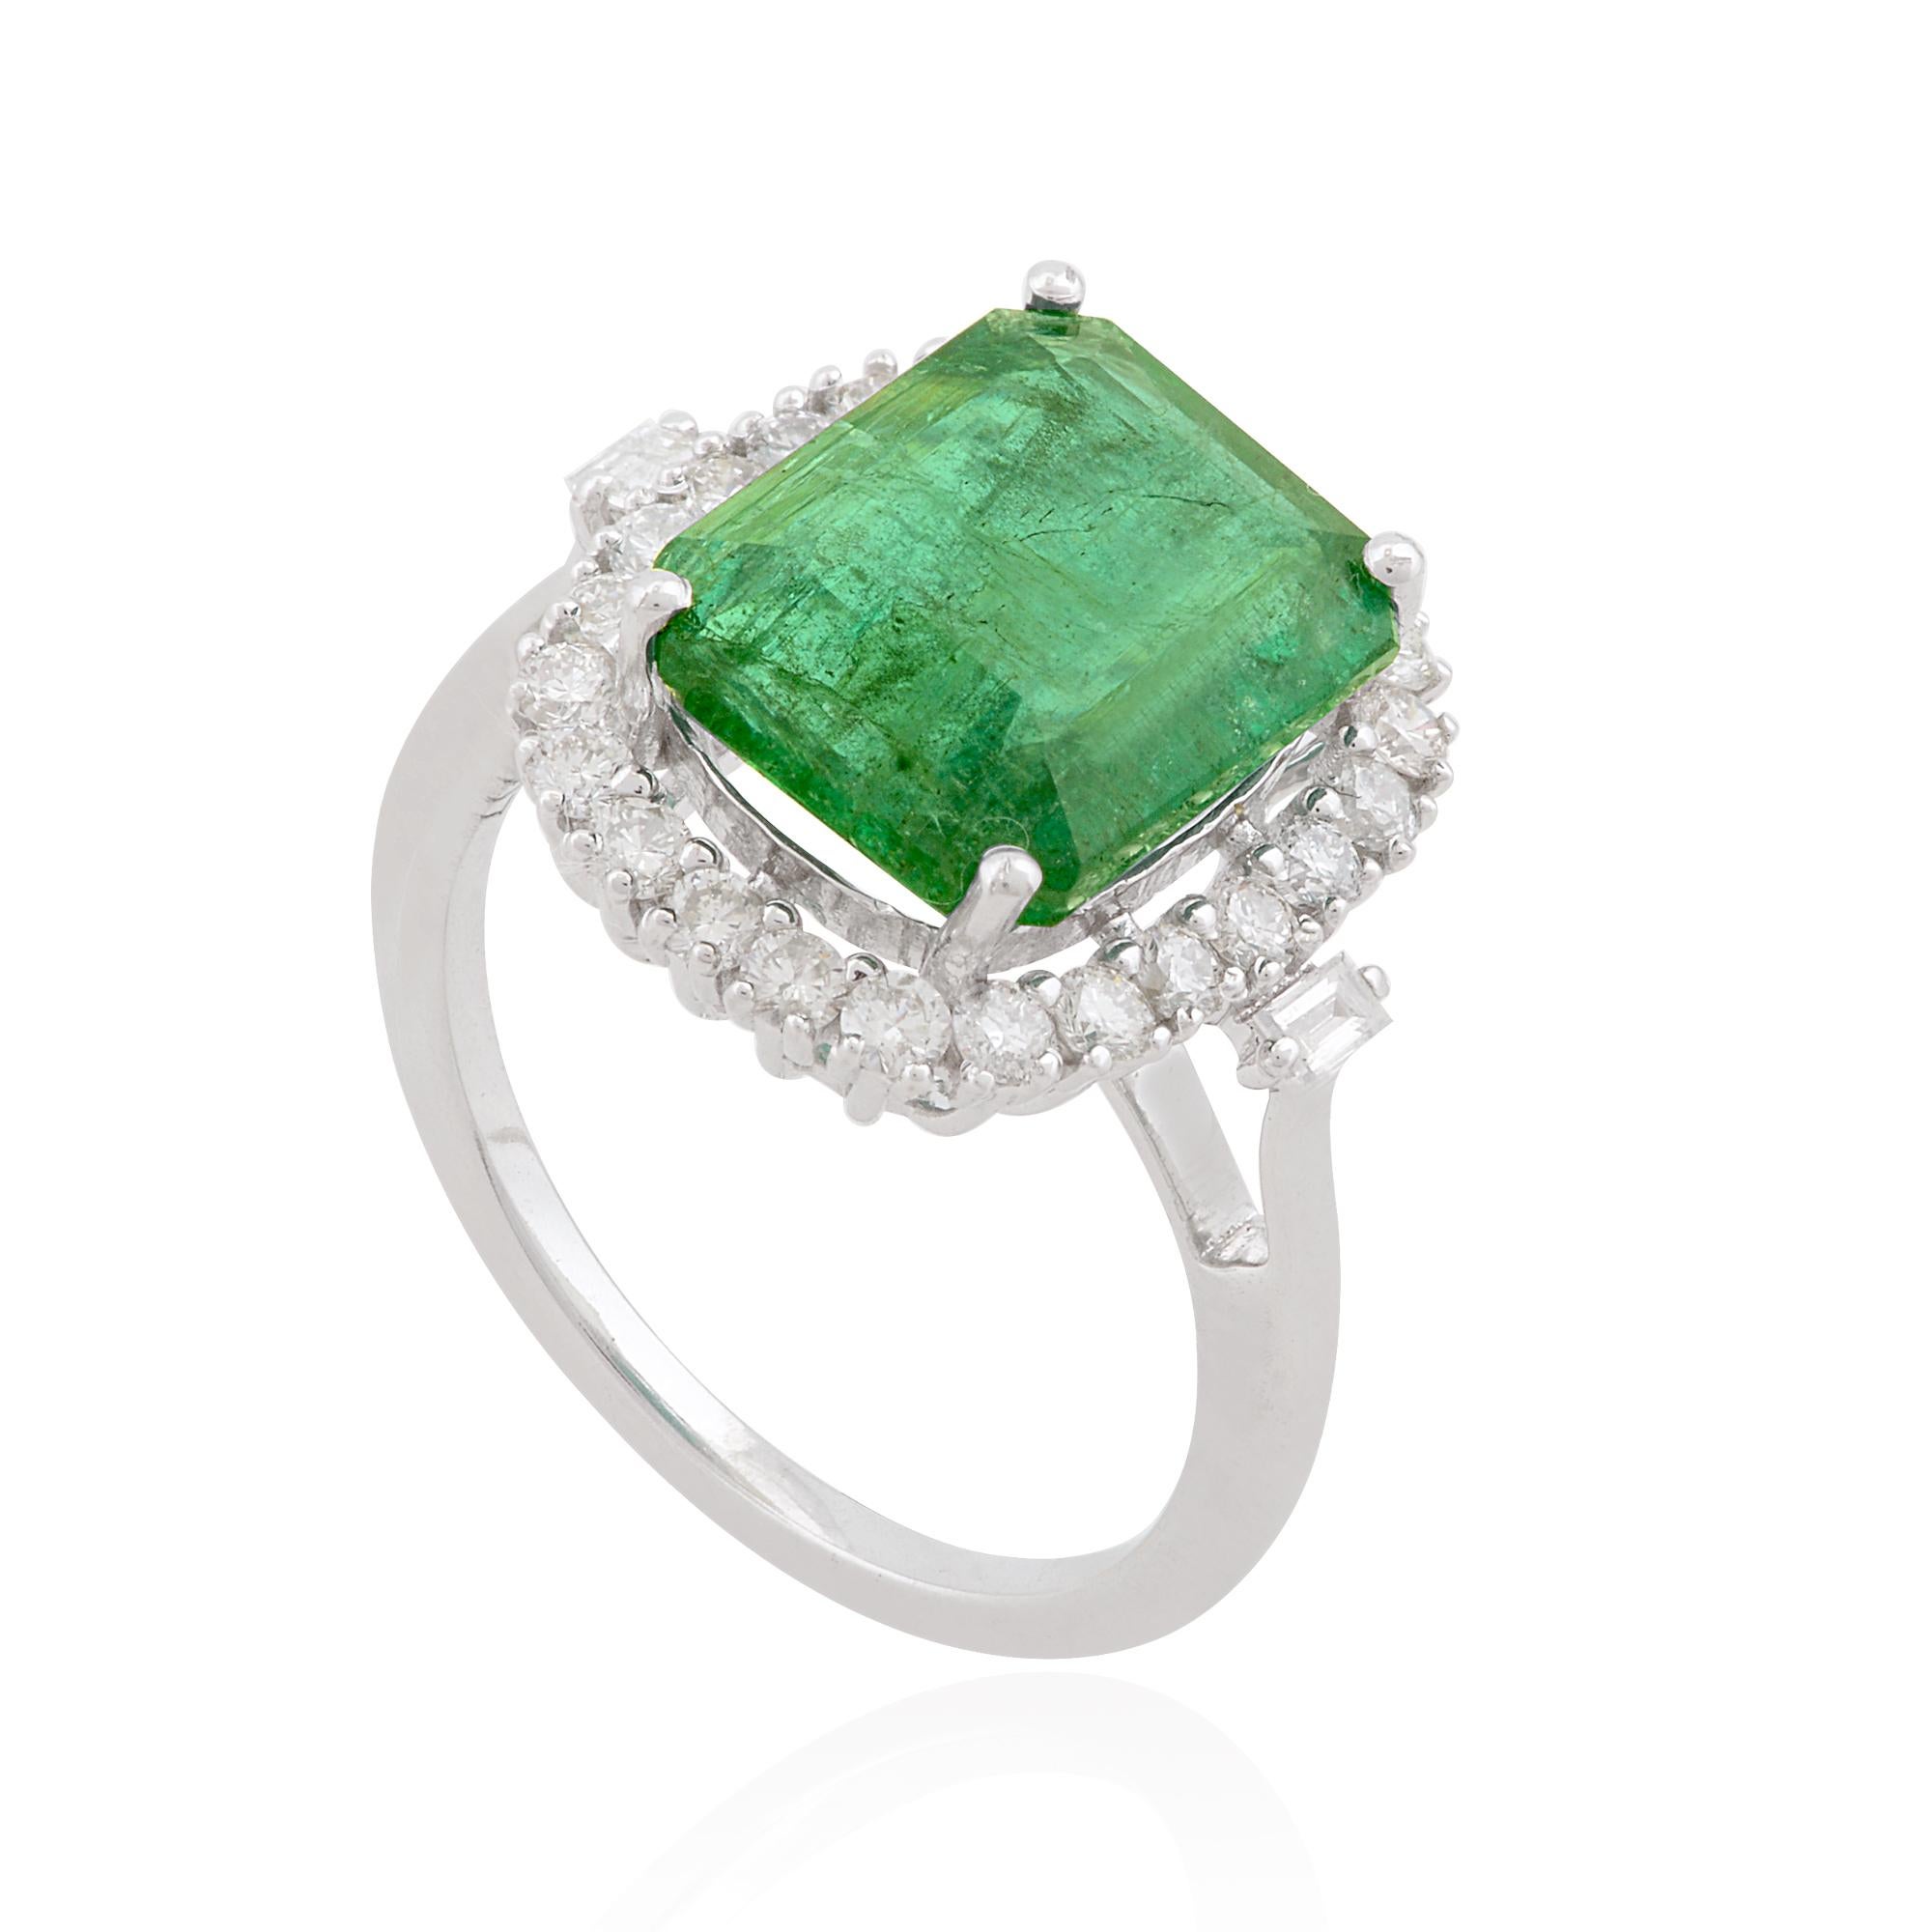 For Sale:  5 Carat Natural Emerald Cocktail Ring 0.75 Carat Diamond Jewelry 10K White Gold 2